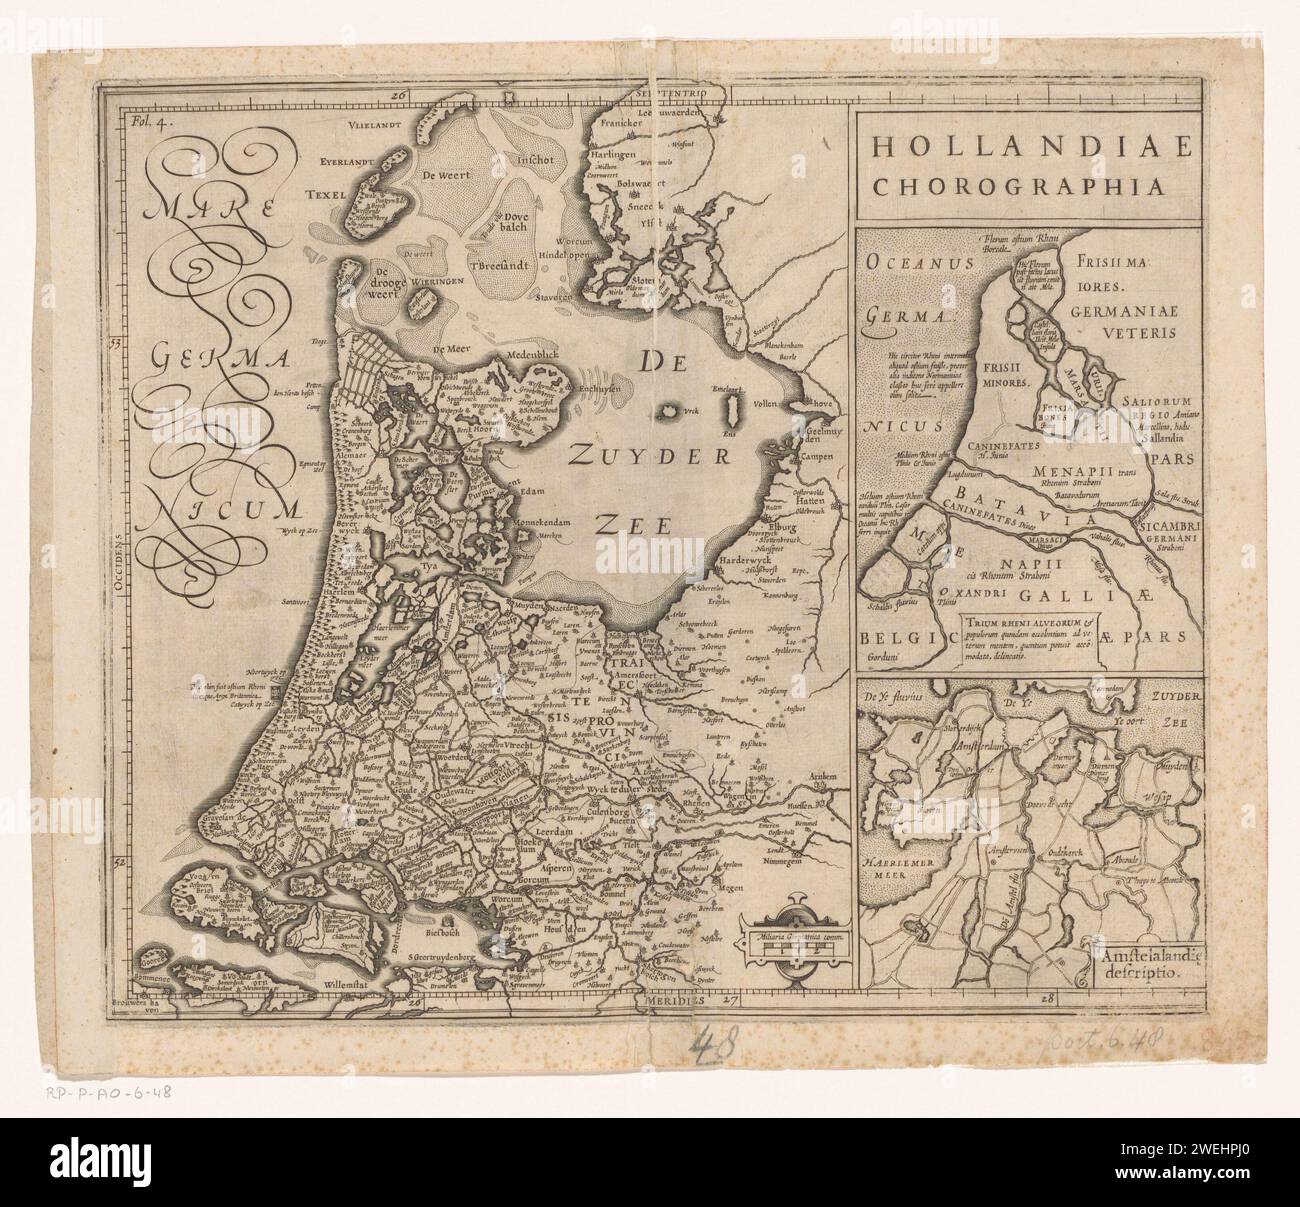 Map of the Graafschap Holland, Anonymous, 1611 - 1614 print At the bottom left of the main map a bowl: Miliaria Germanica Comm. At the top right of the title, including a historical deployment map of the Netherlands in ancient times, including an Amstelland deployment card. Degree distribution along the edges.  paper engraving maps of separate countries or regions Holland. Amstelland Stock Photo